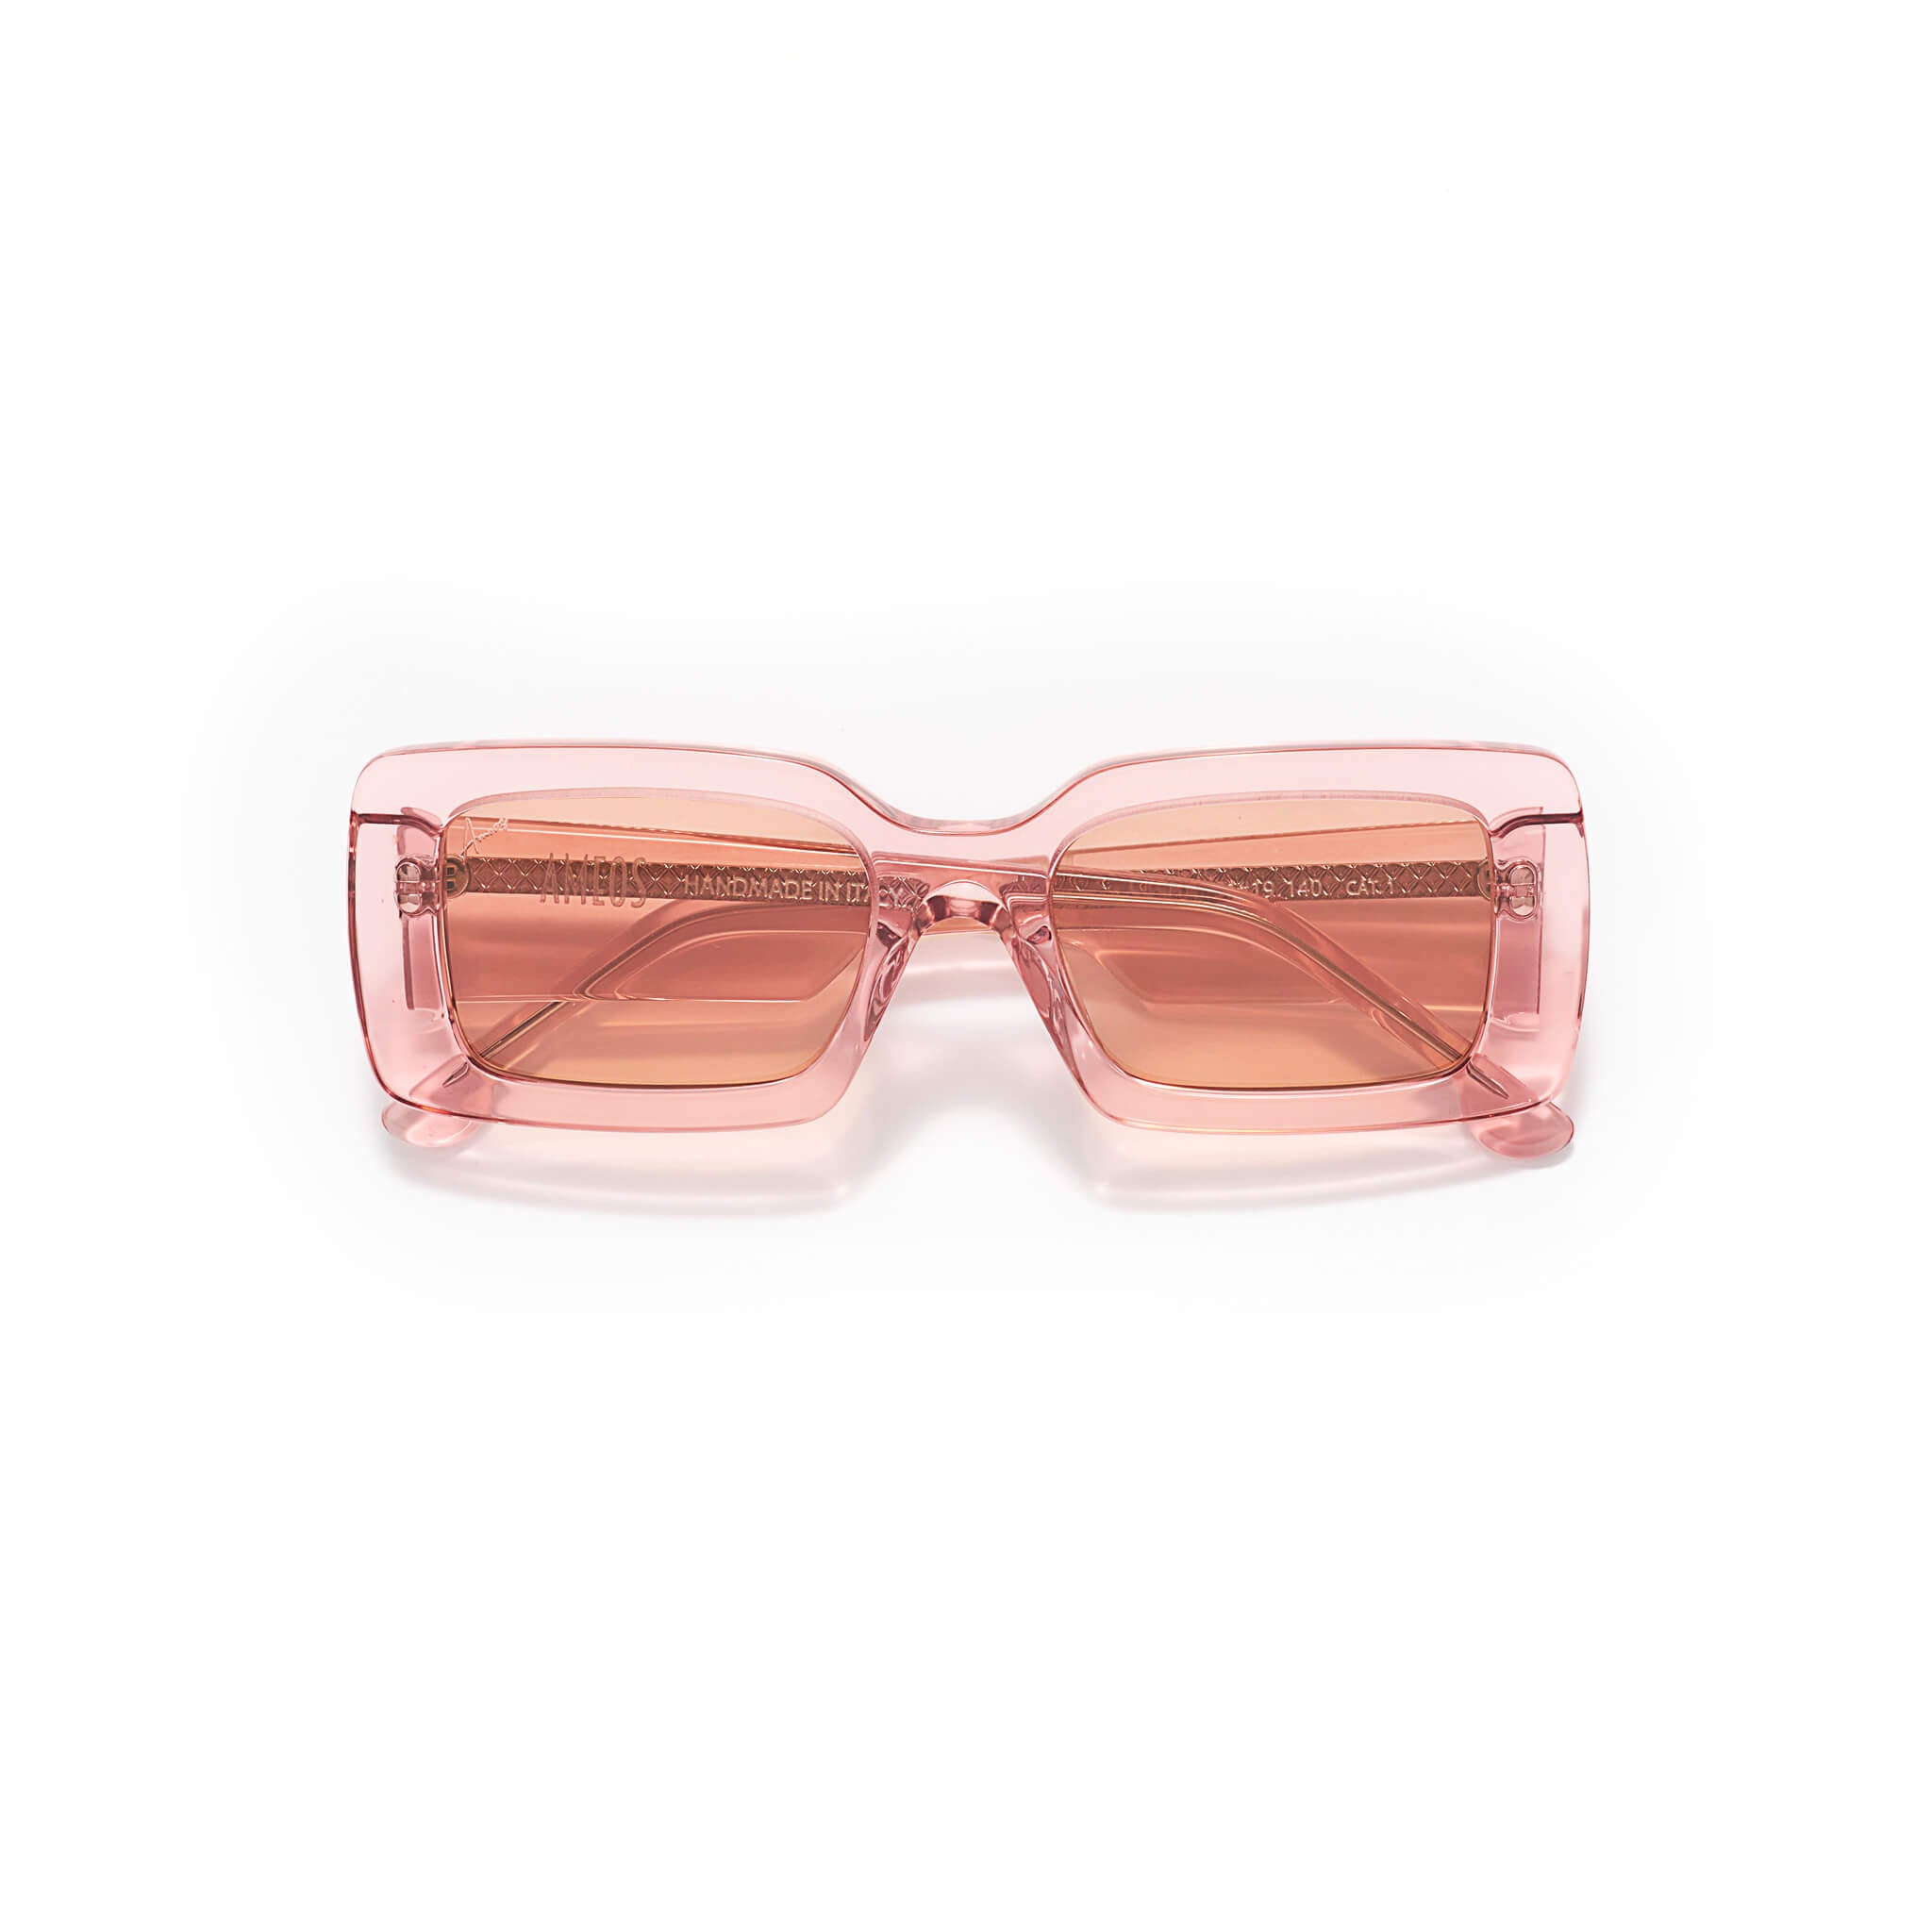 Rose frames sunglasses with brown lenses